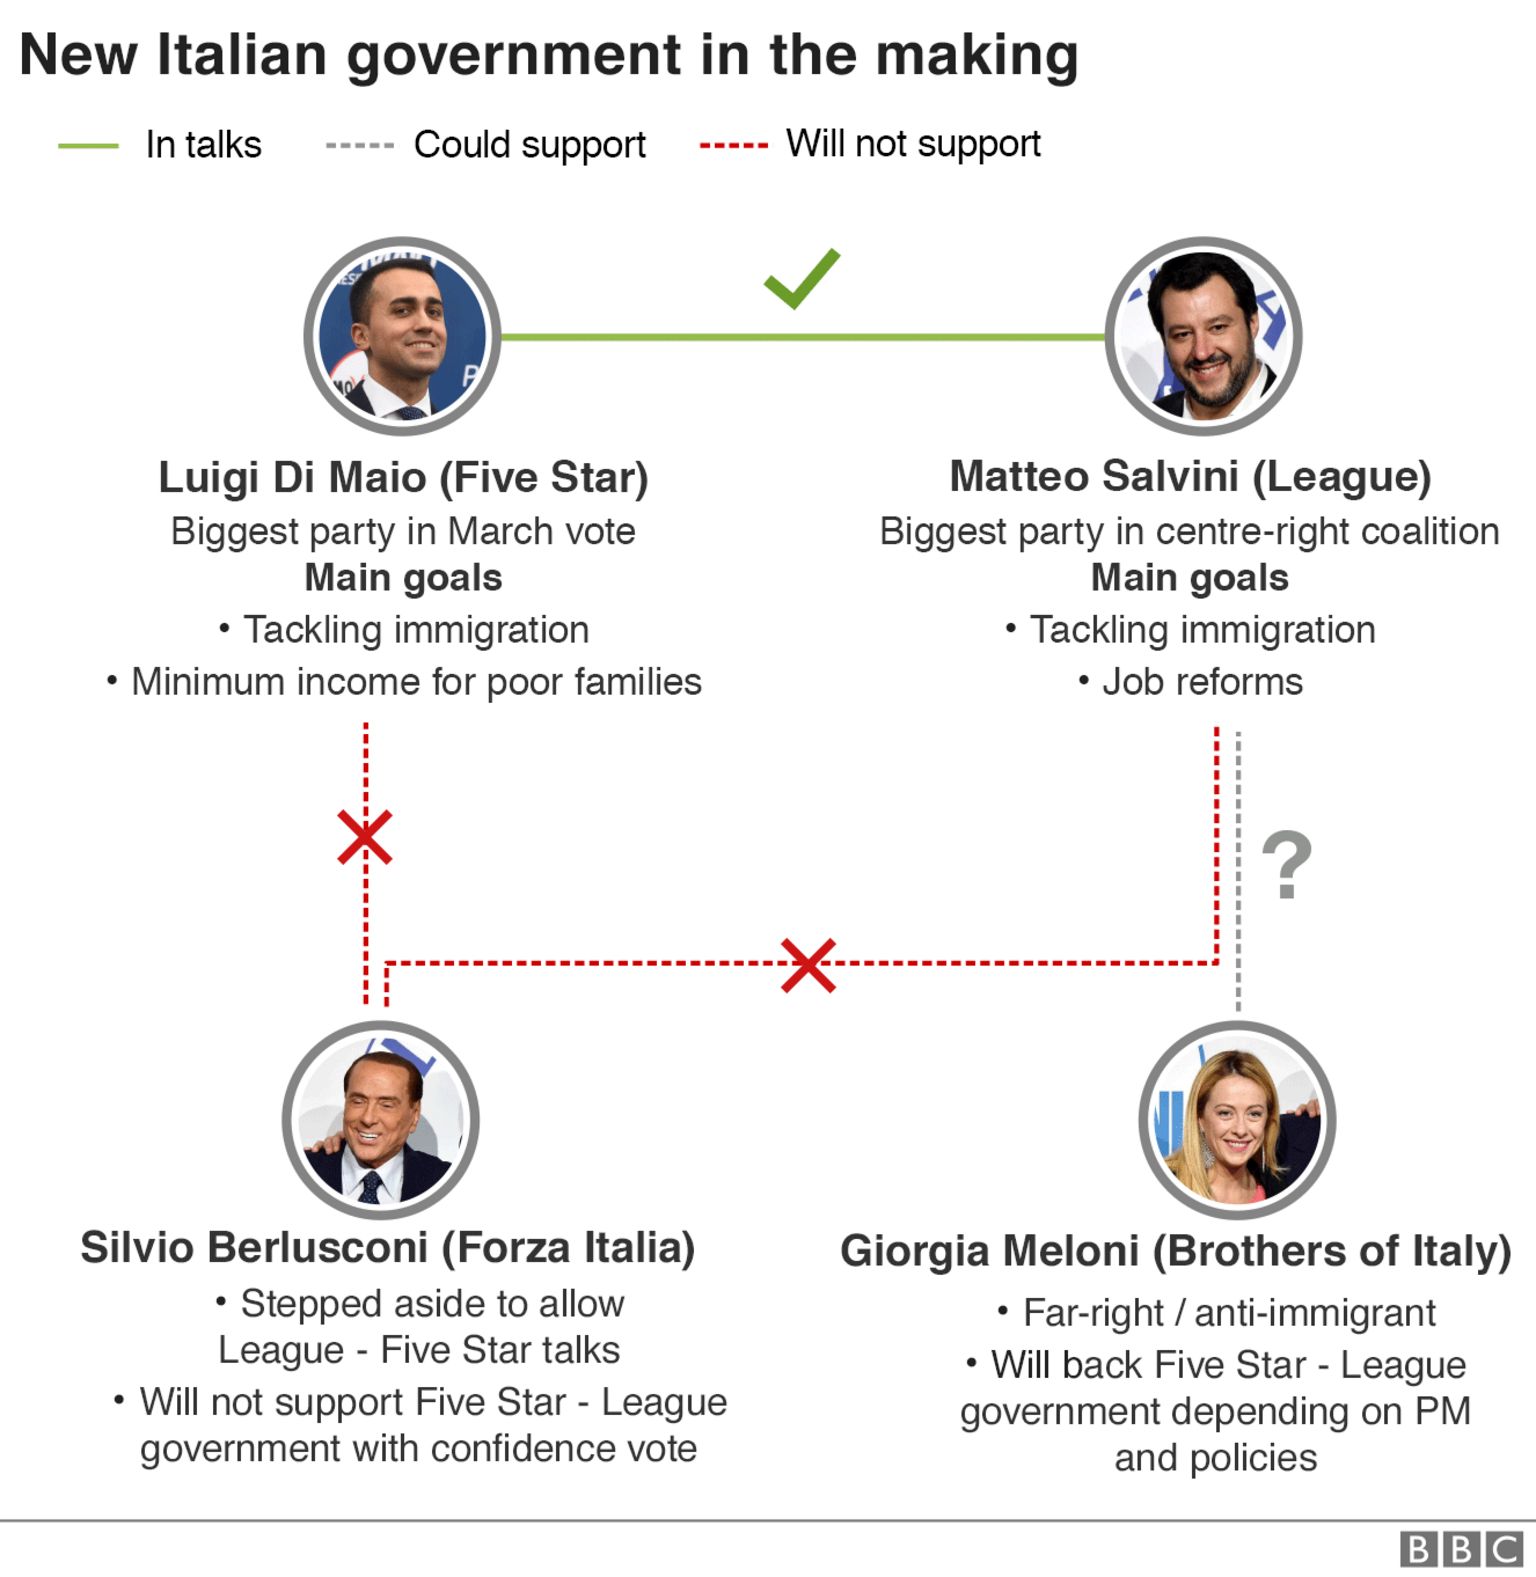 Graphic showing negotiations for a new government in Italy